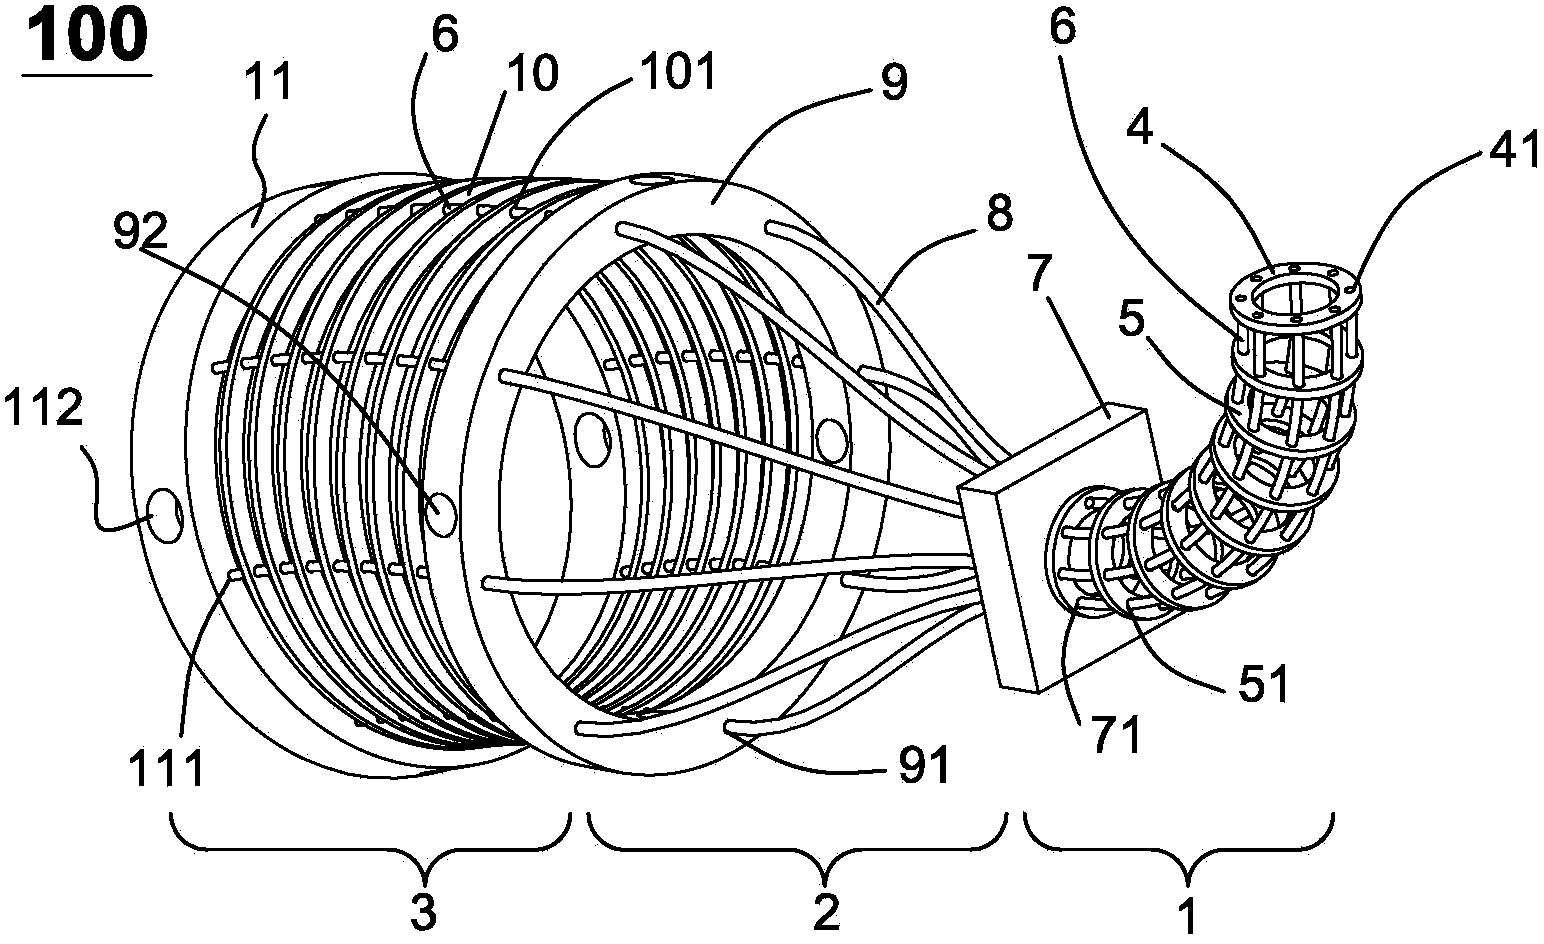 Flexible continuous-body mechanical structure capable of being bent and telescopic